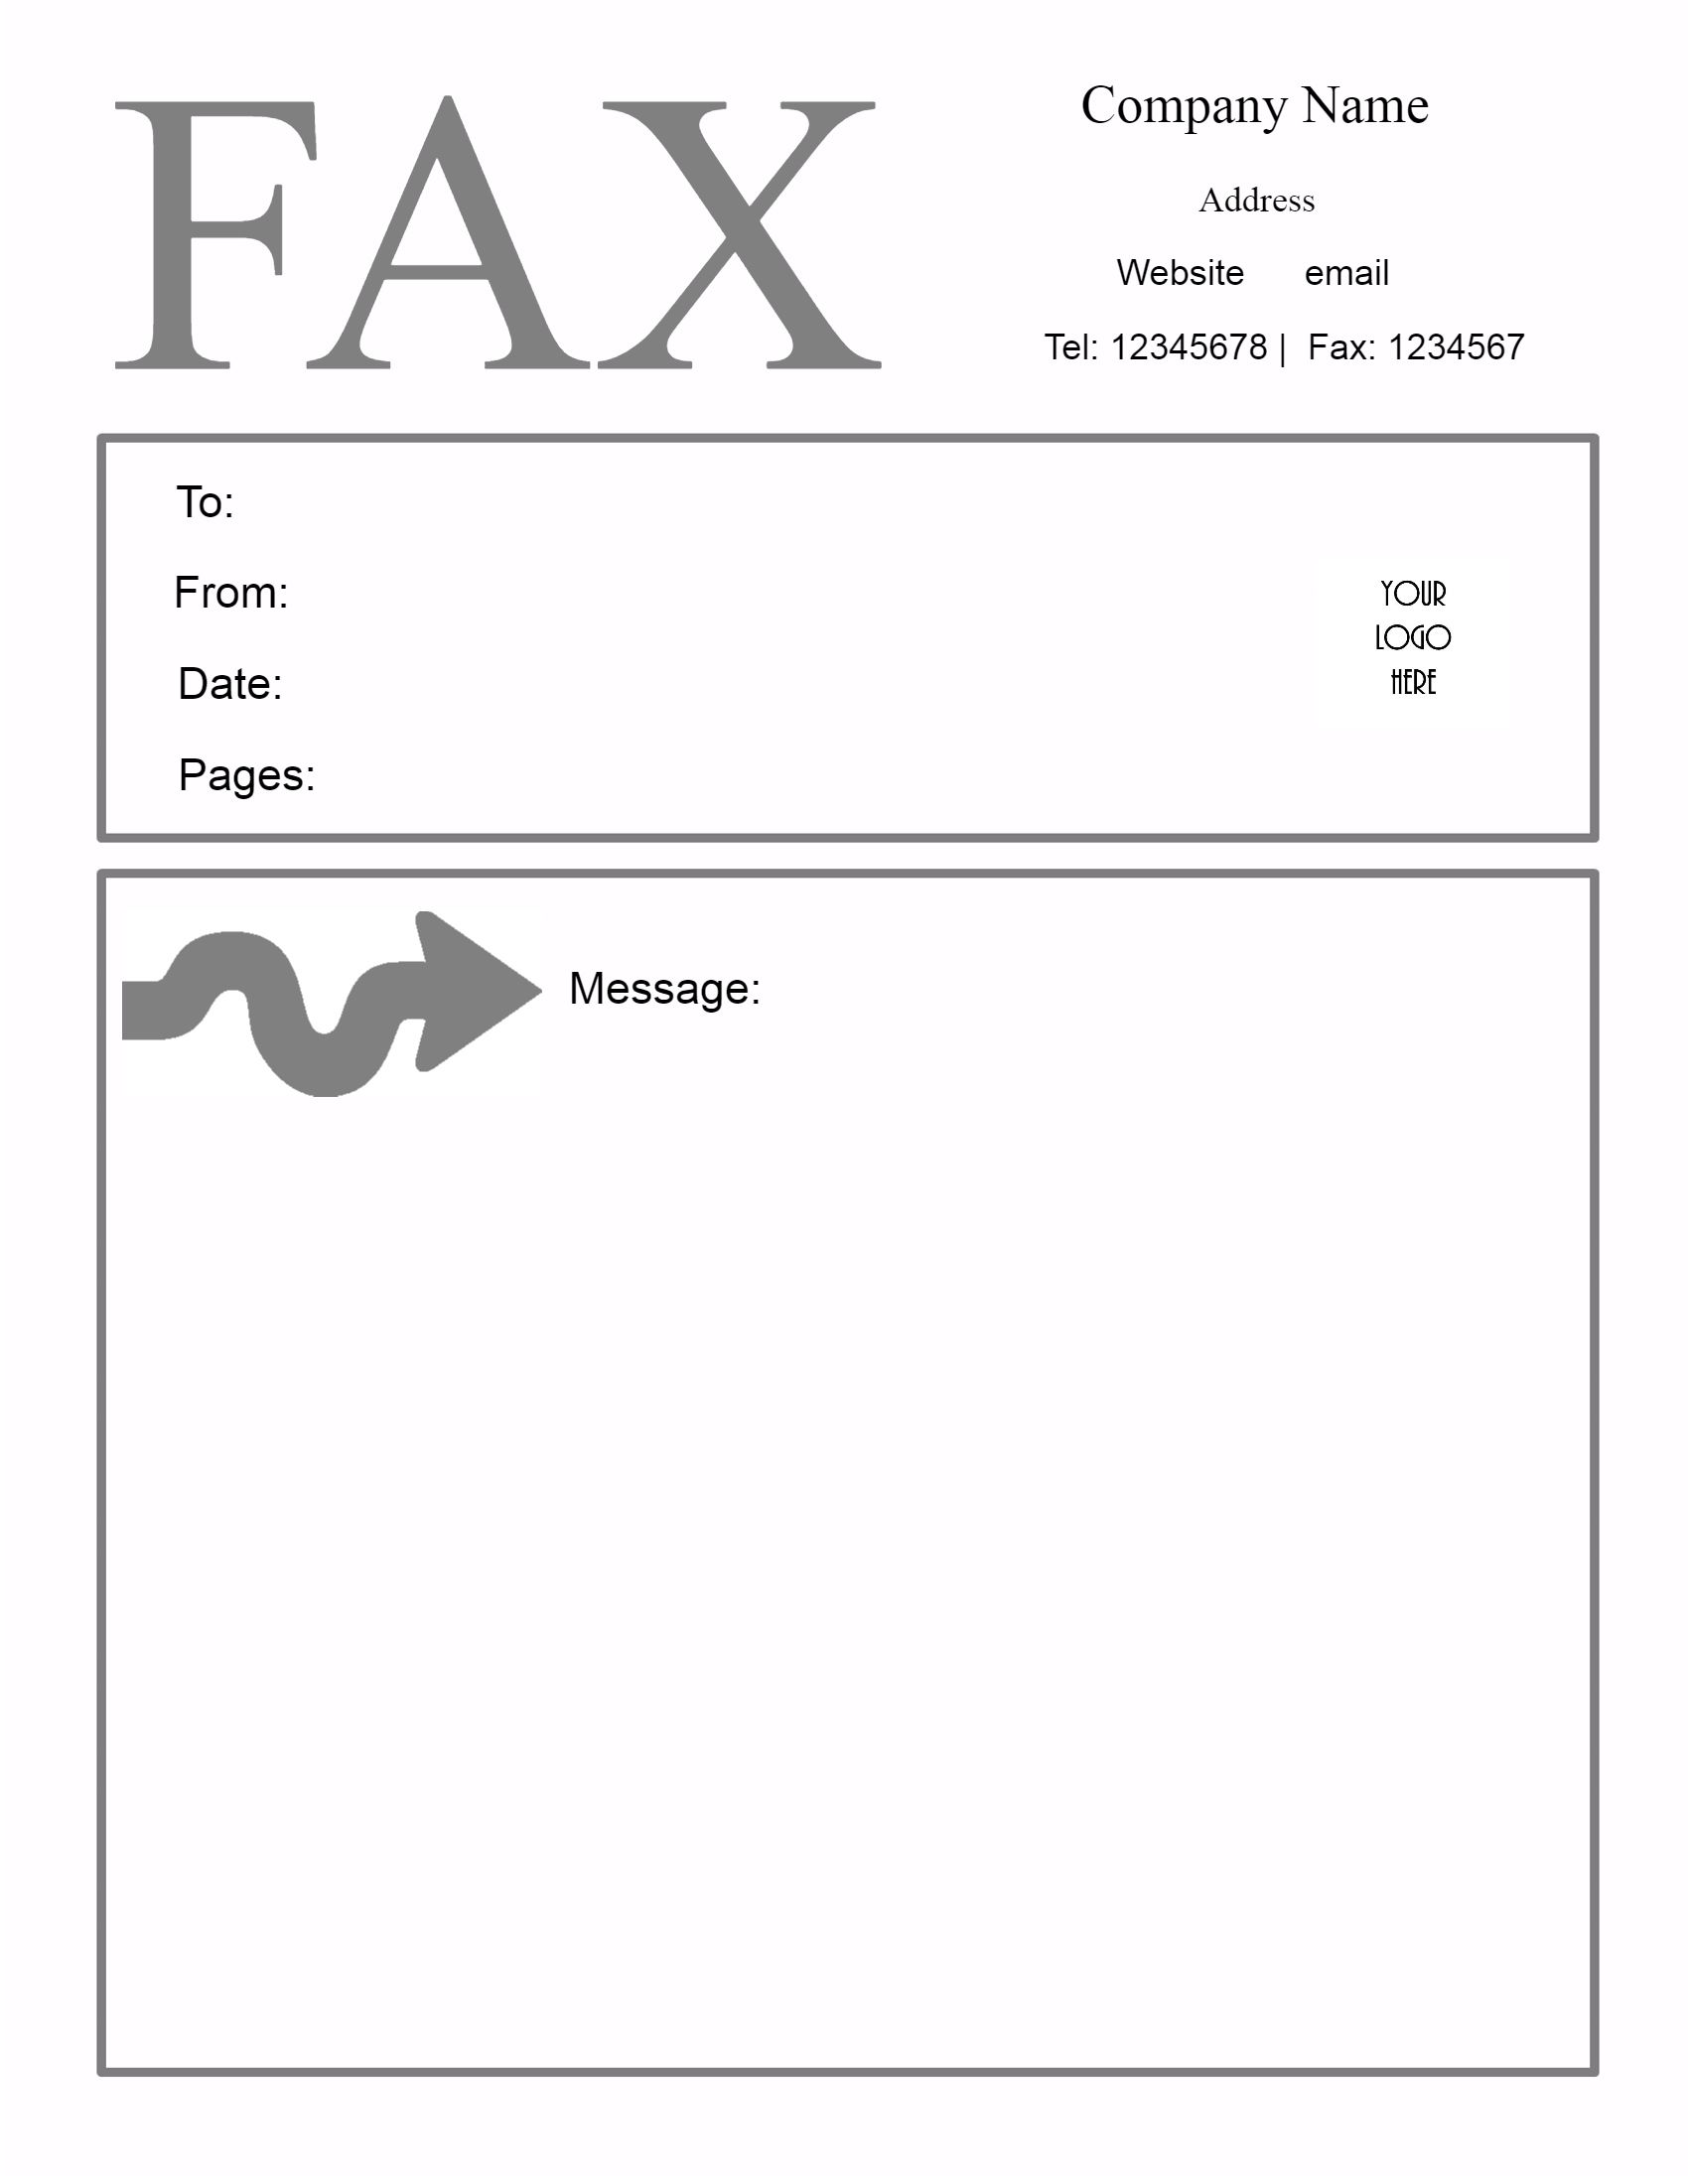 Free Fax Cover Sheet Template Customize Online Then Print